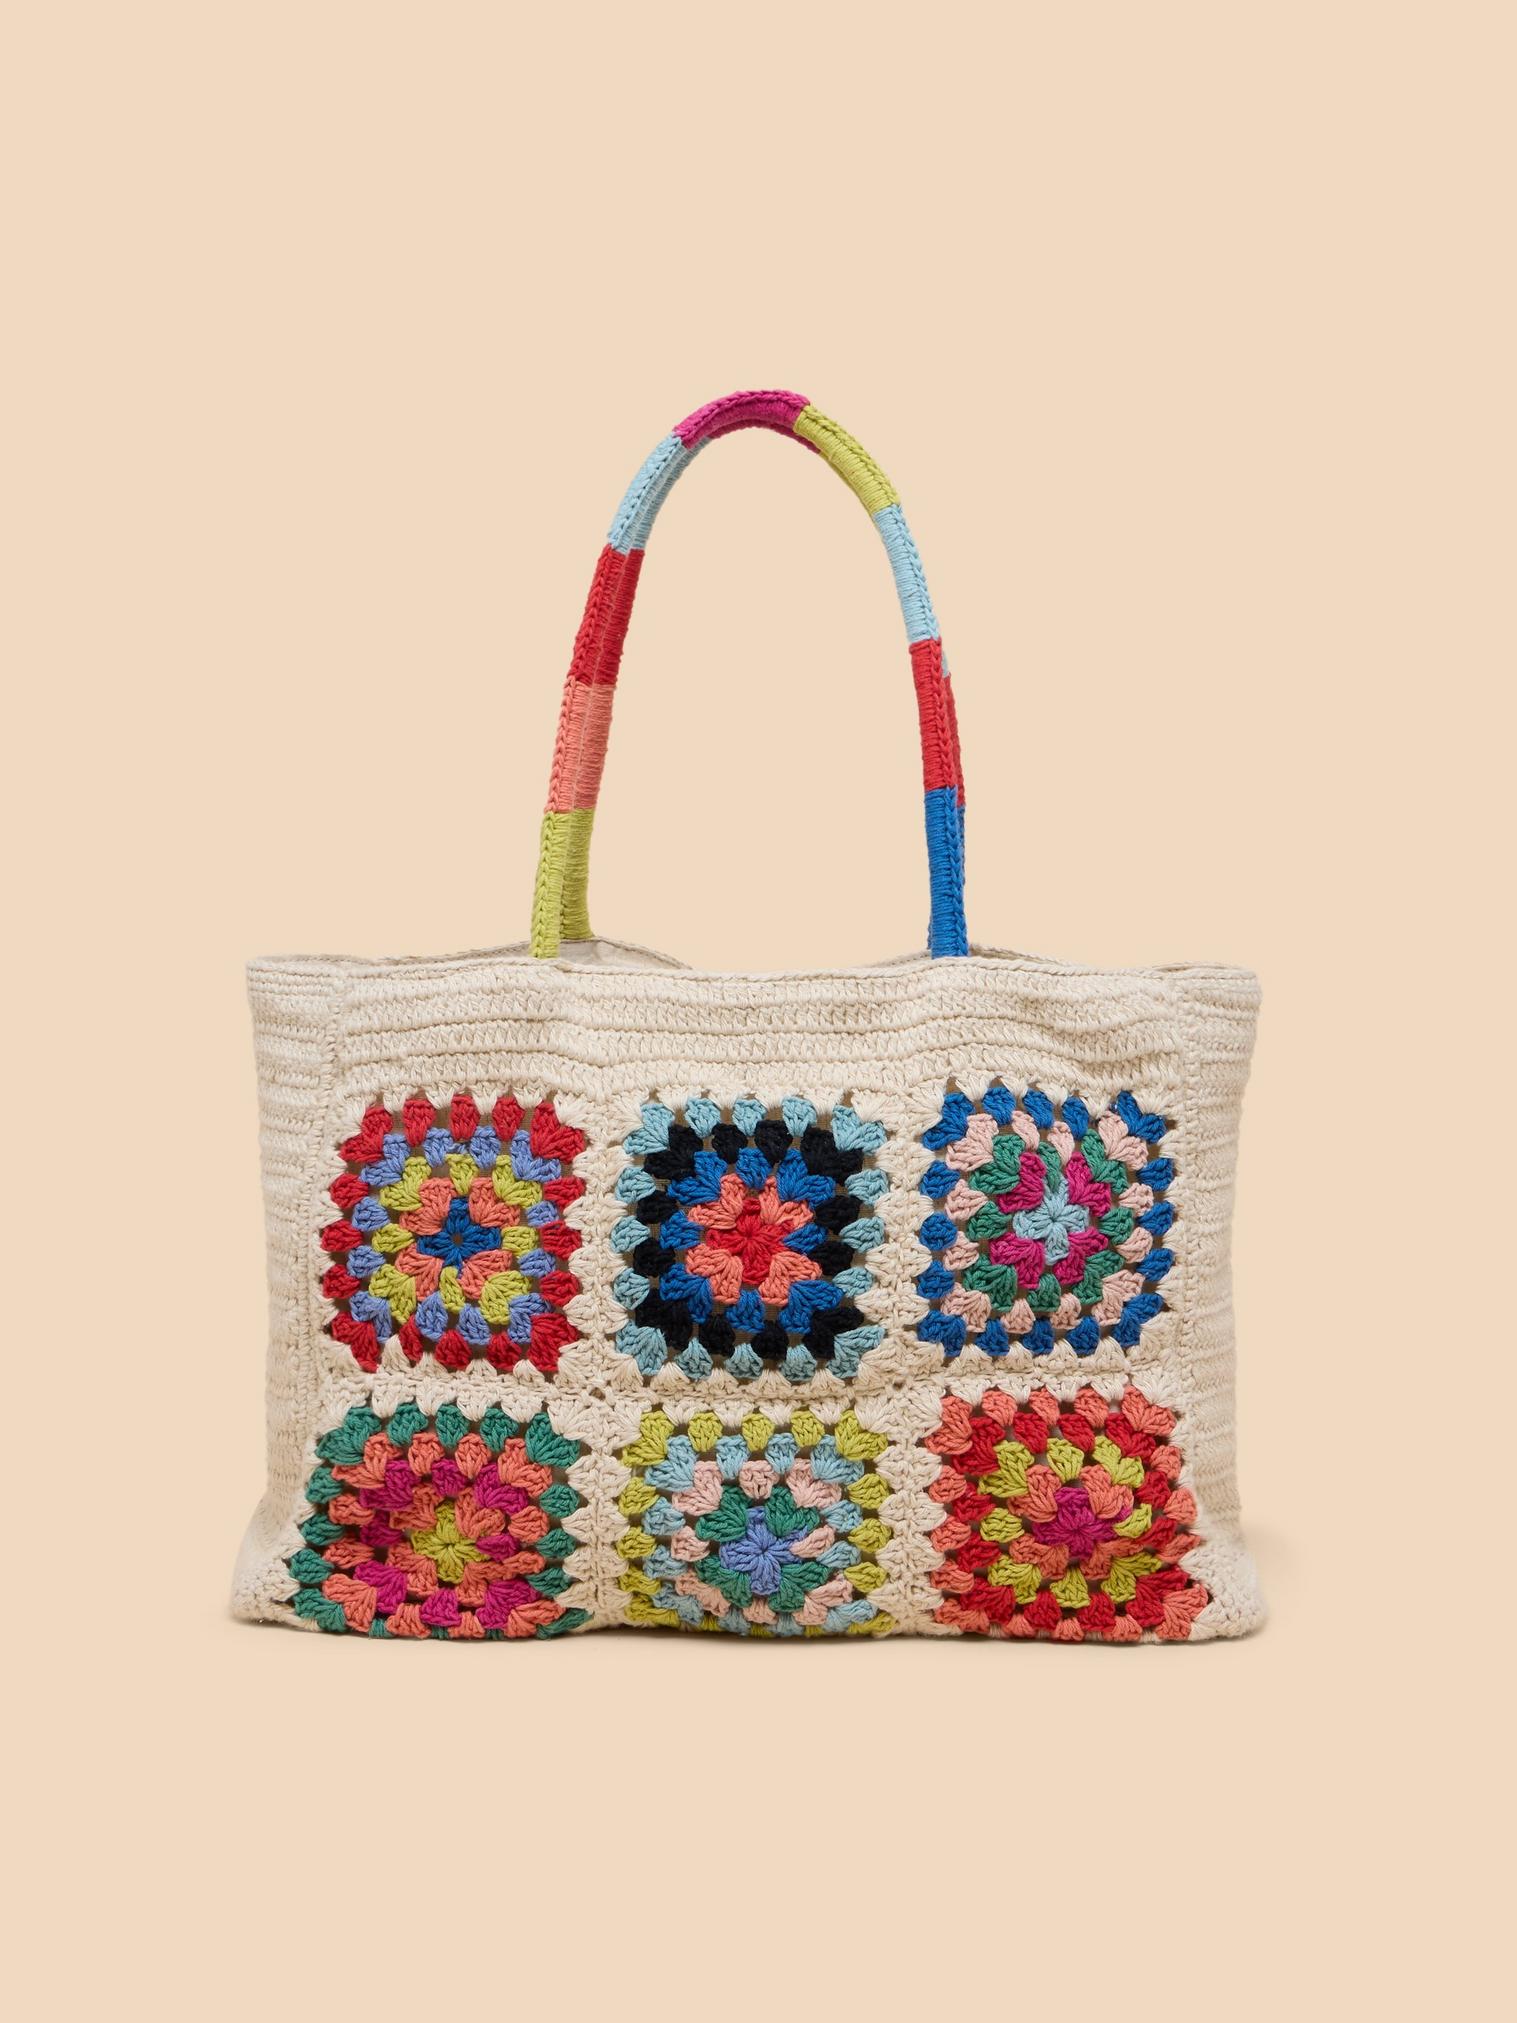 Callie Crochet Tote in NAT MLT - LIFESTYLE